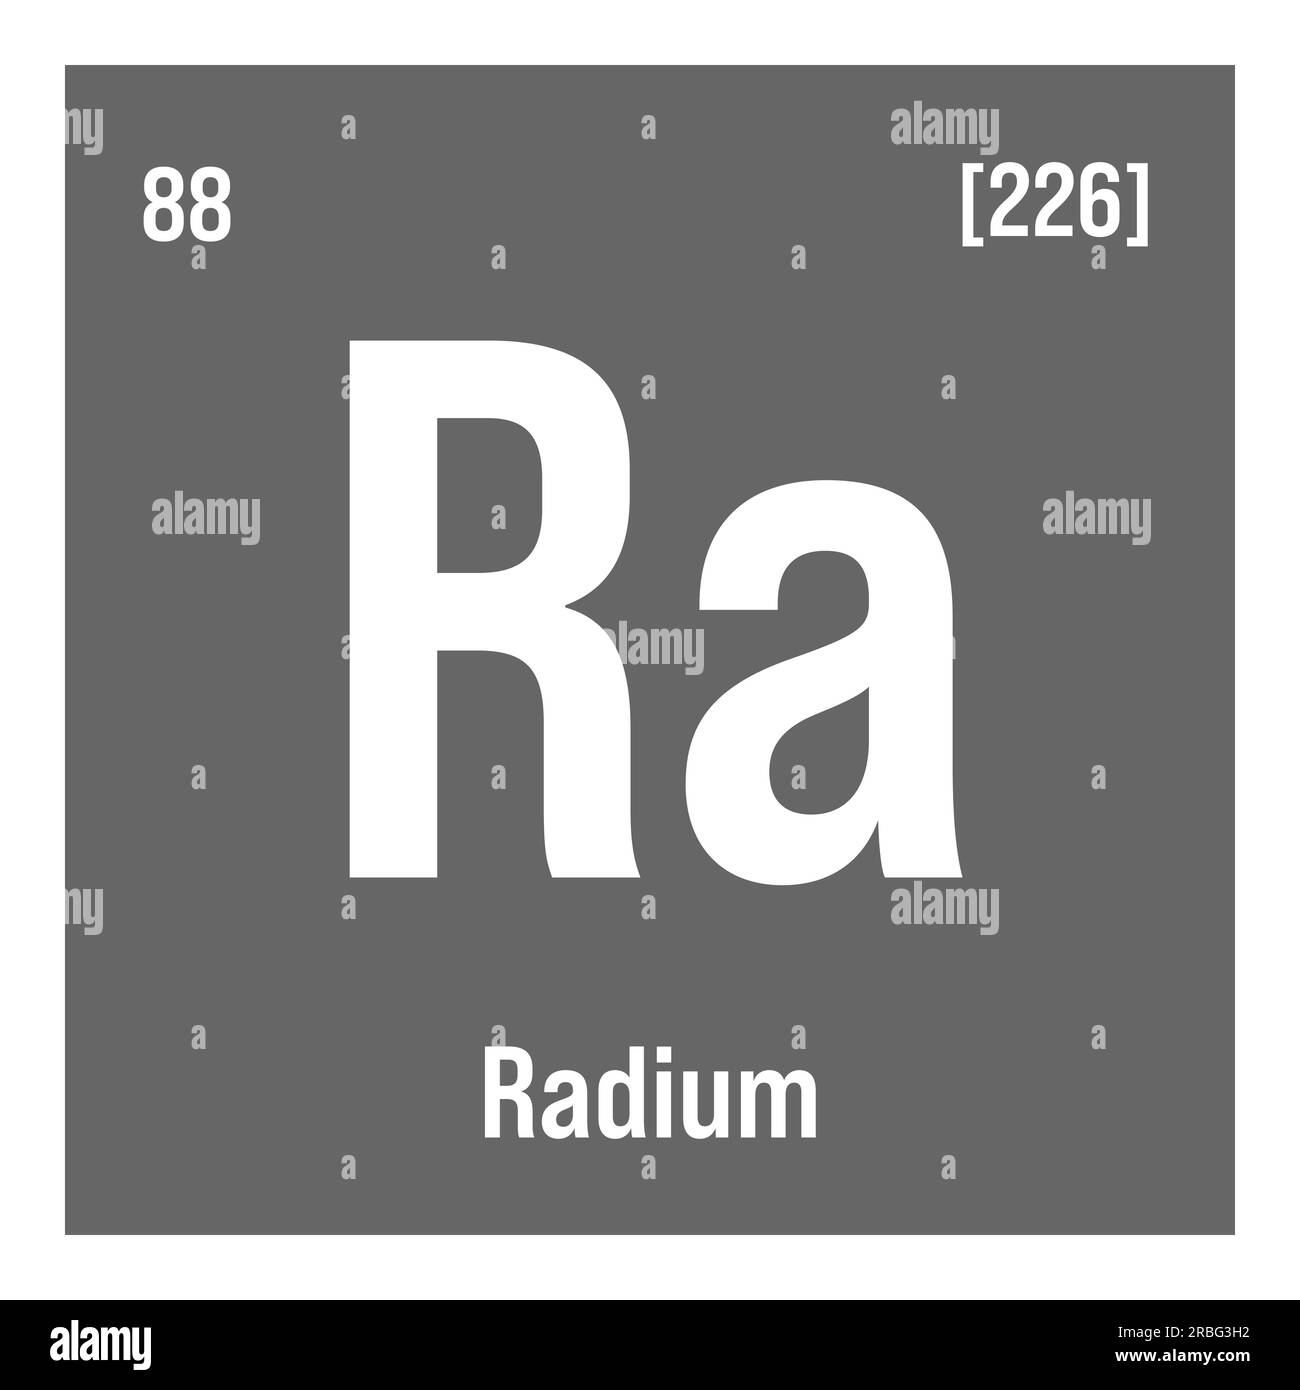 Radium, Ra, periodic table element with name, symbol, atomic number and weight. Alkaline earth metal with radioactive properties, formerly used in medical therapy and as a component of certain types of paint. Stock Vector